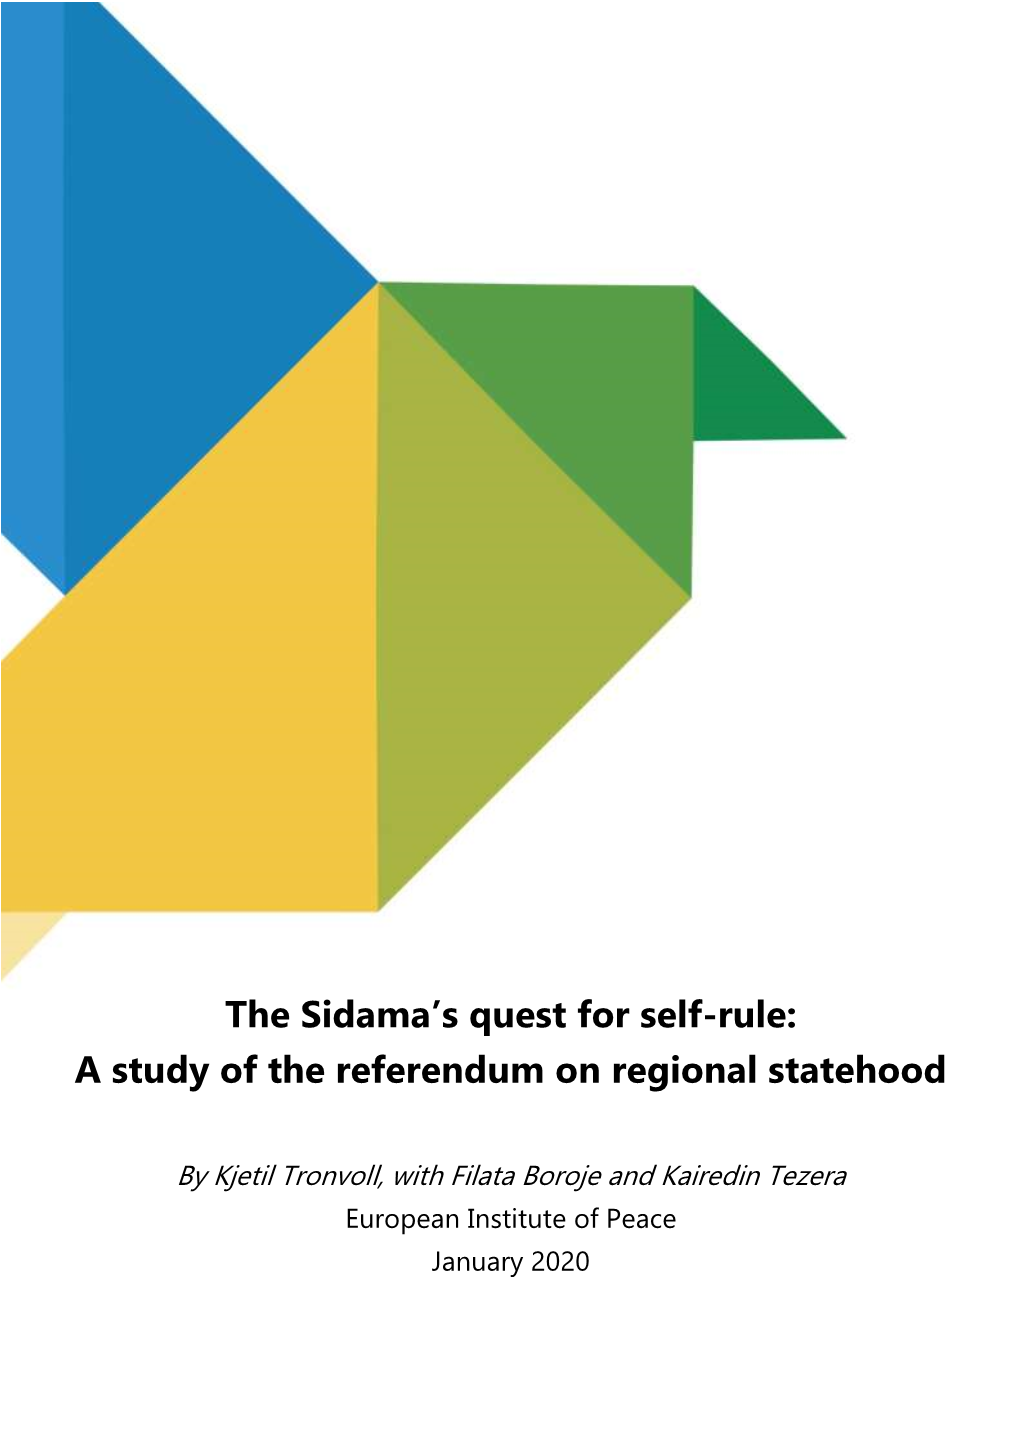 The Sidama's Quest for Self-Rule: a Study of the Referendum on Regional